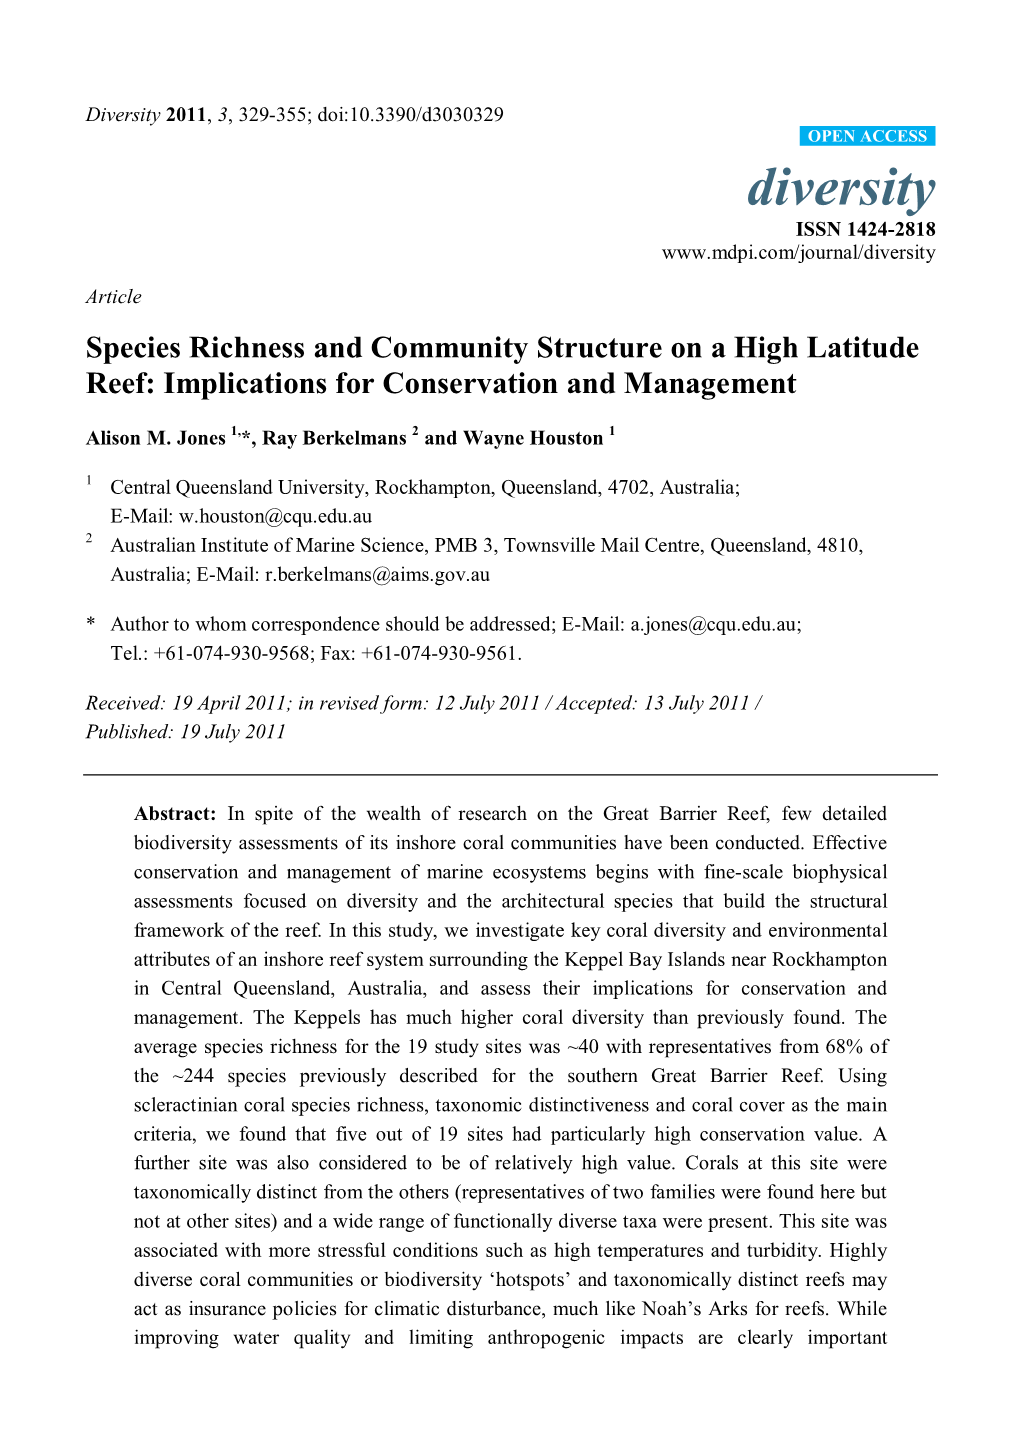 Species Richness and Community Structure on a High Latitude Reef: Implications for Conservation and Management